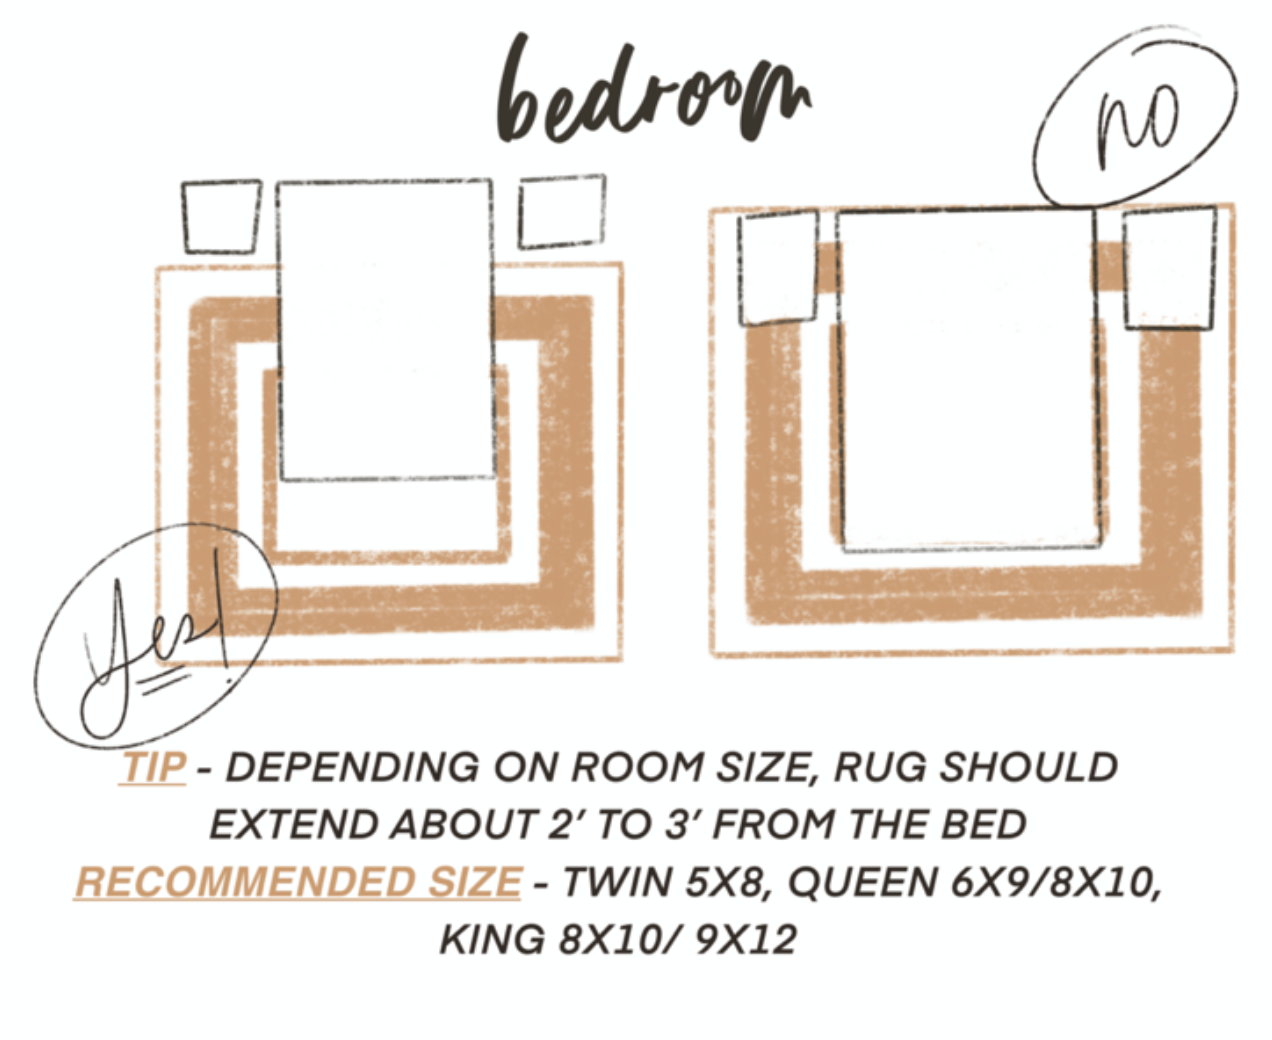 Size Rug With Guide Nesting Grace, What Size Rug Should You Use Under A Queen Bed